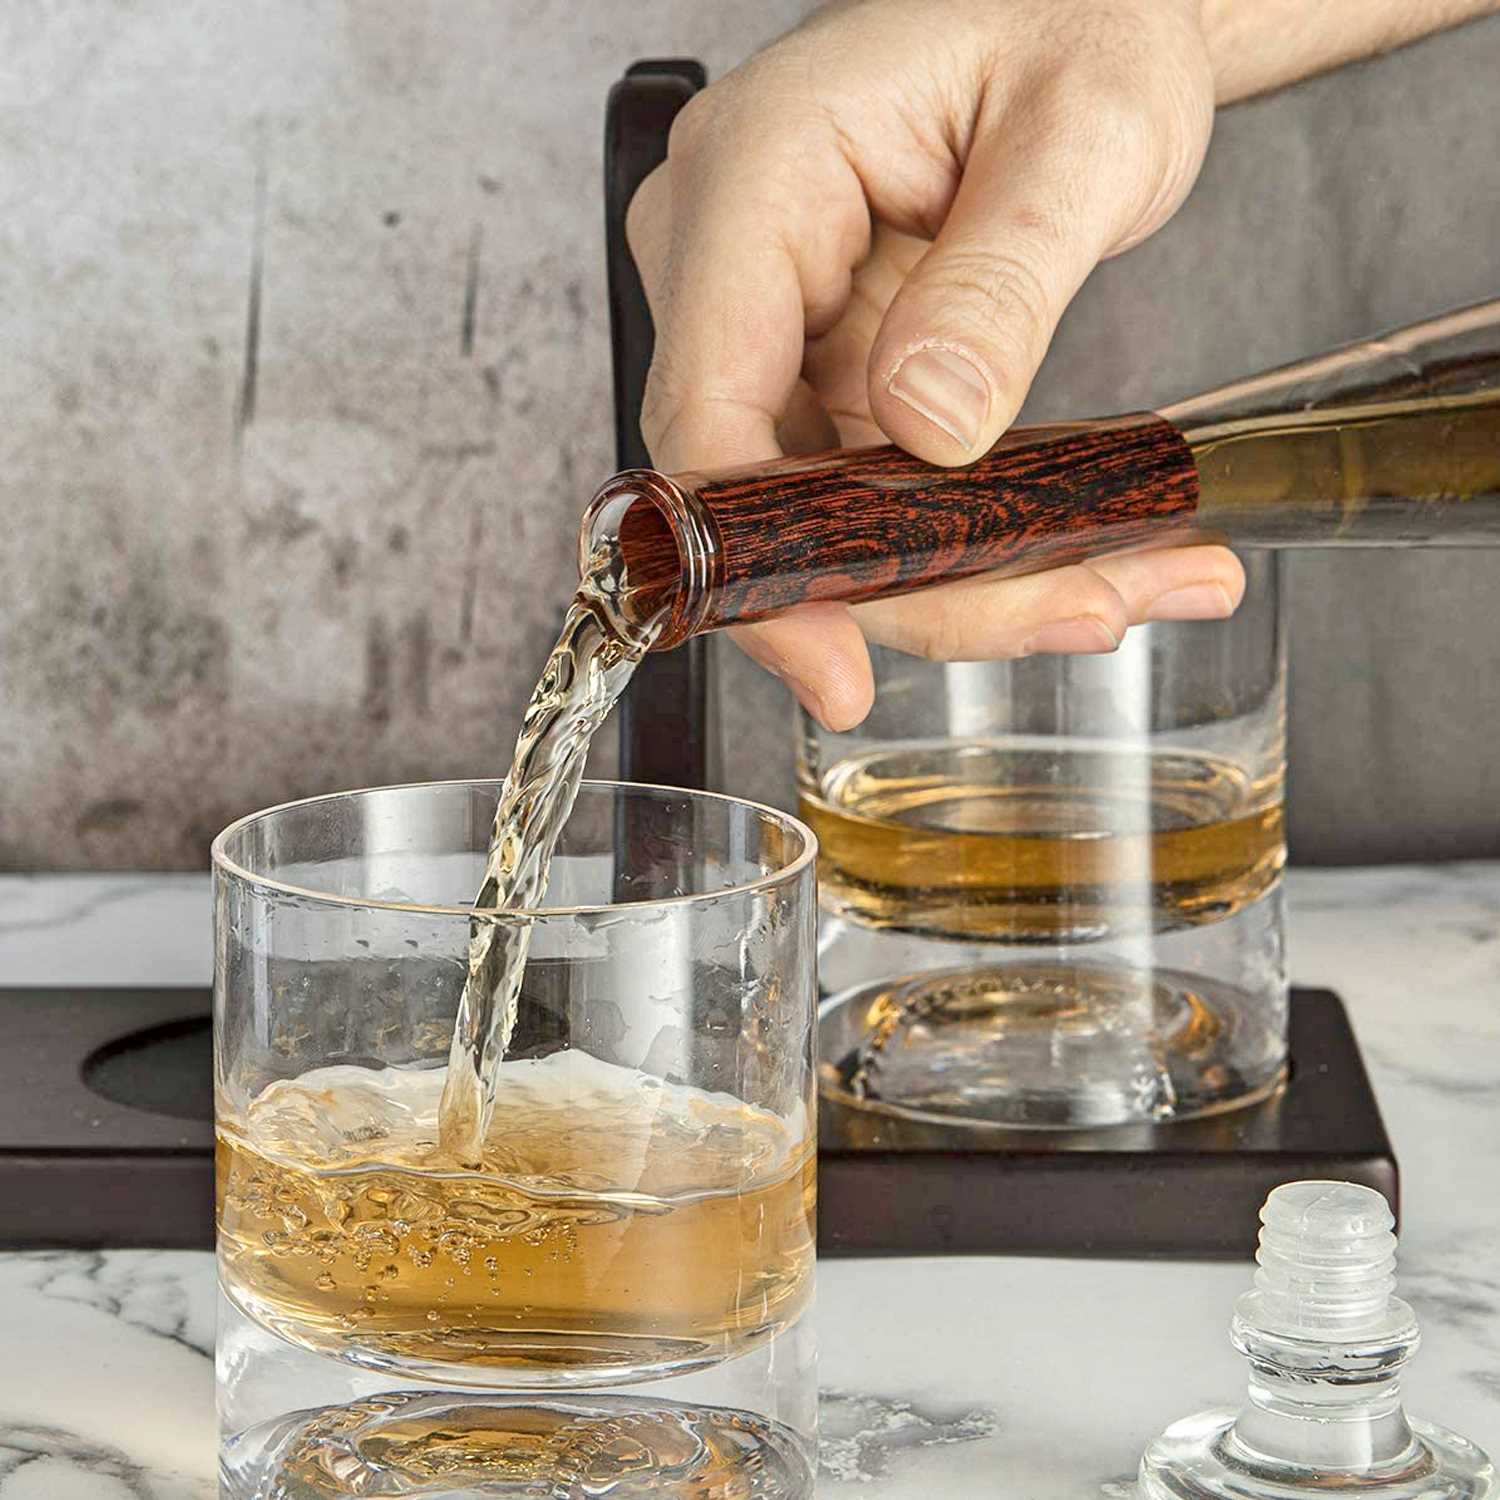 Baseball Bat Whiskey Decanter and Glass Set Pour - Cool Birthday Gifts For Guys